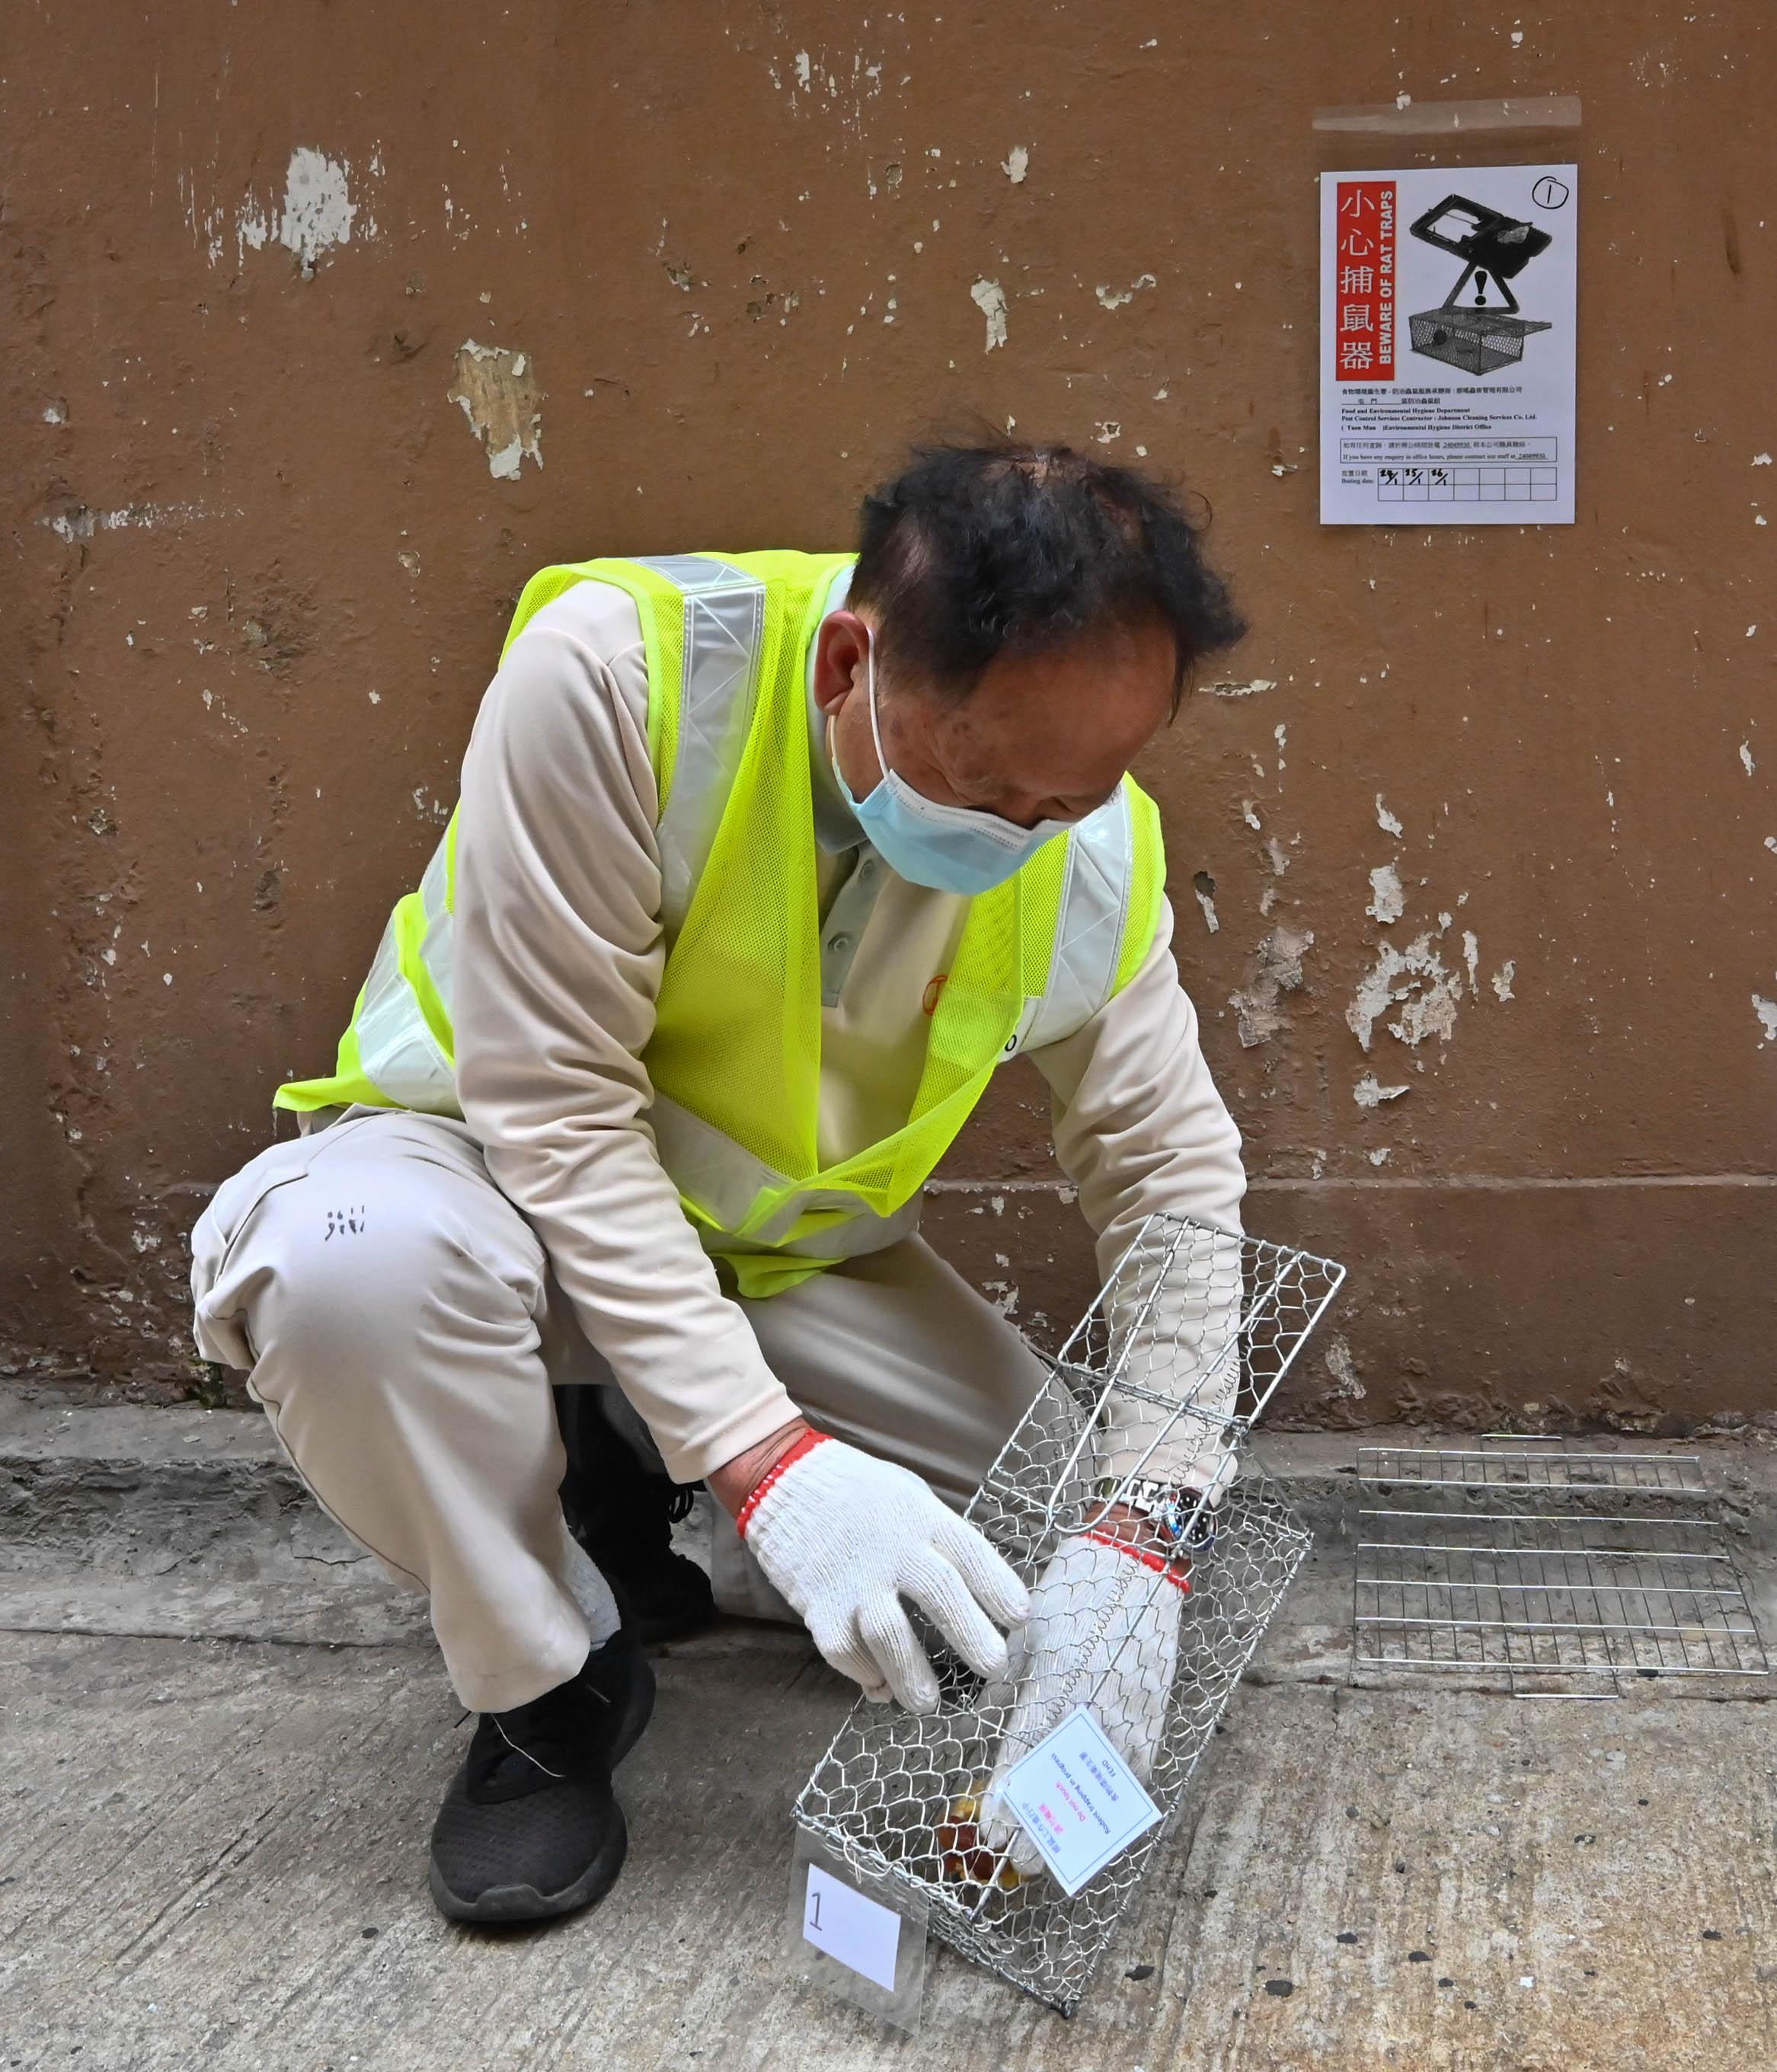 A spokesman for the Food and Environmental Hygiene Department (FEHD) today (January 27) appealed to members of the public to maintain cleanliness in the household, the community and public places during the year end and the Lunar New Year holidays. The FEHD is continuously rolling out the territory-wide anti-rodent campaign this year. Photo shows a service contractor of the FEHD placing a trap in a rear lane to strengthen rodent control.